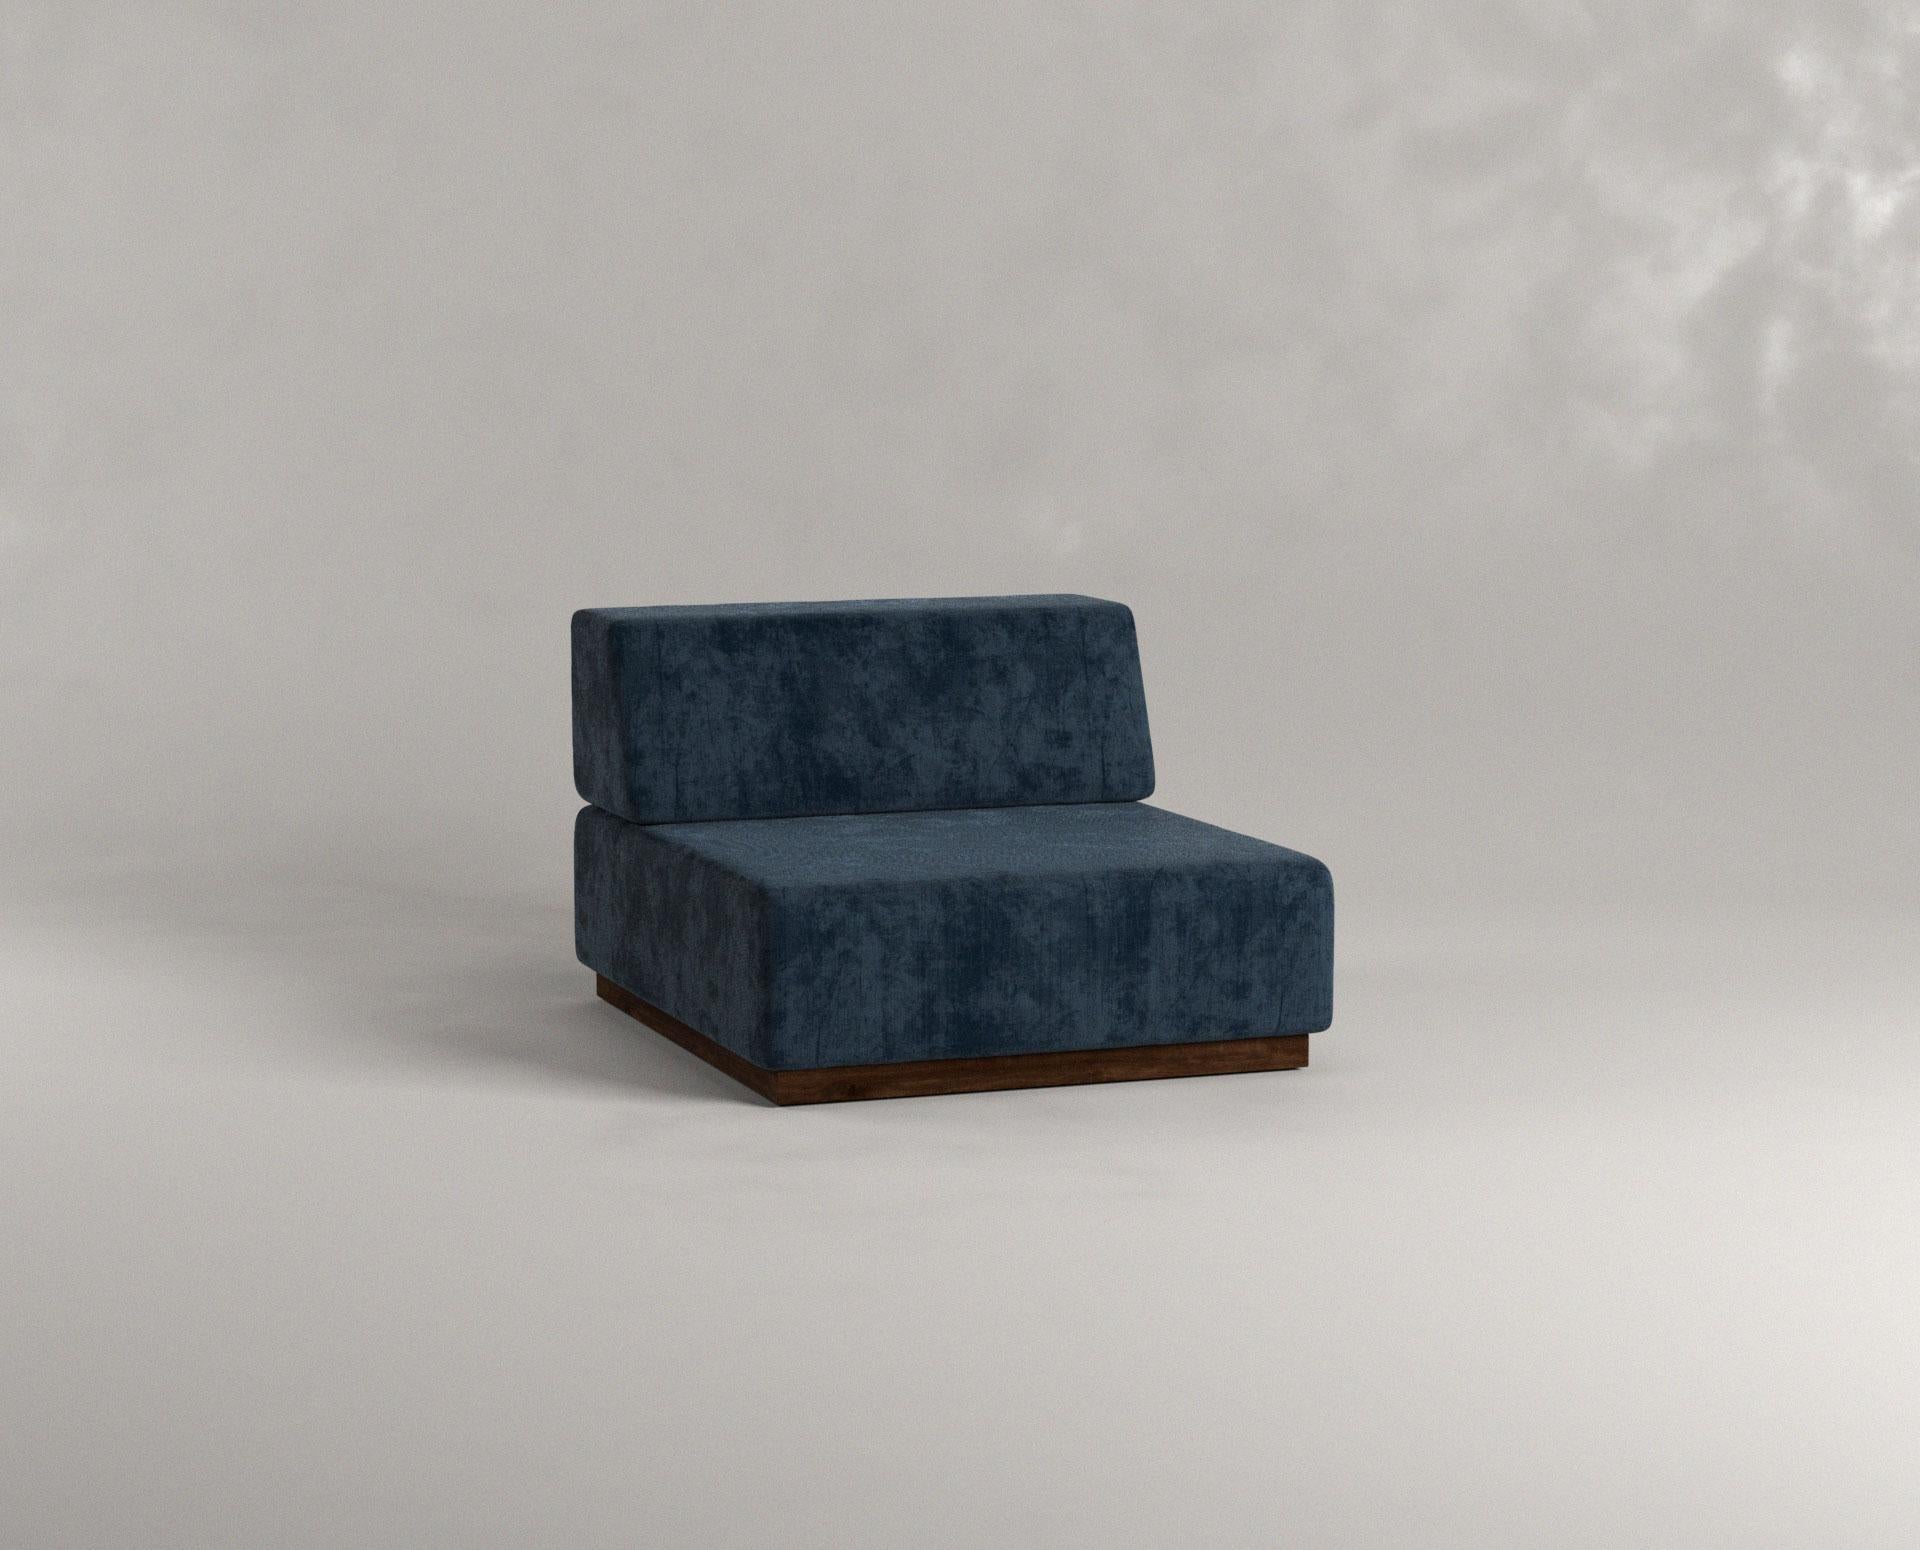 Blue Nube Lounger by Siete Studio
Dimensions: D100 x W80 x H60 cm.
Materials: Walnut, cushions, upholstery.

Characterised by its round edges and soft white cushions, Nube carries the comforting sensation of falling into a cloud.
The framework is